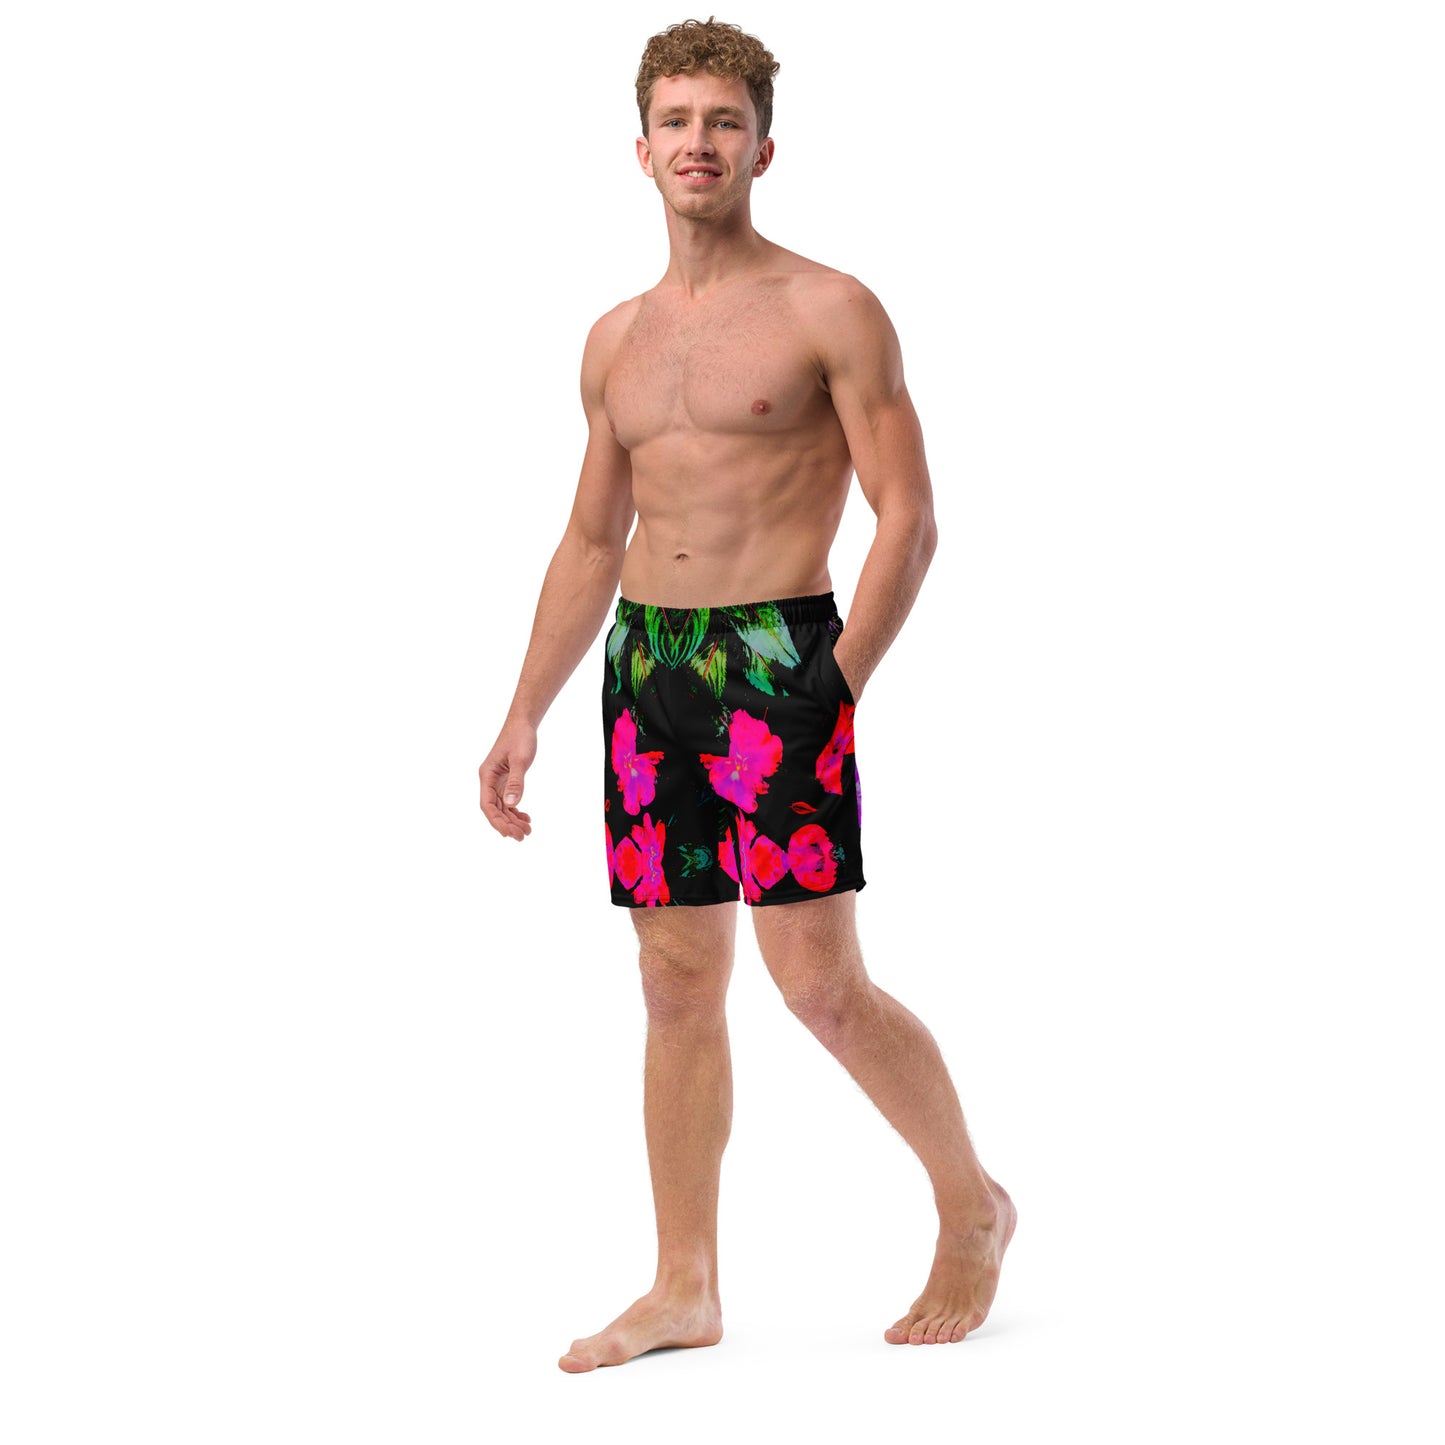 Busy Lizzy Men's Recycled Board Short UPF 50+